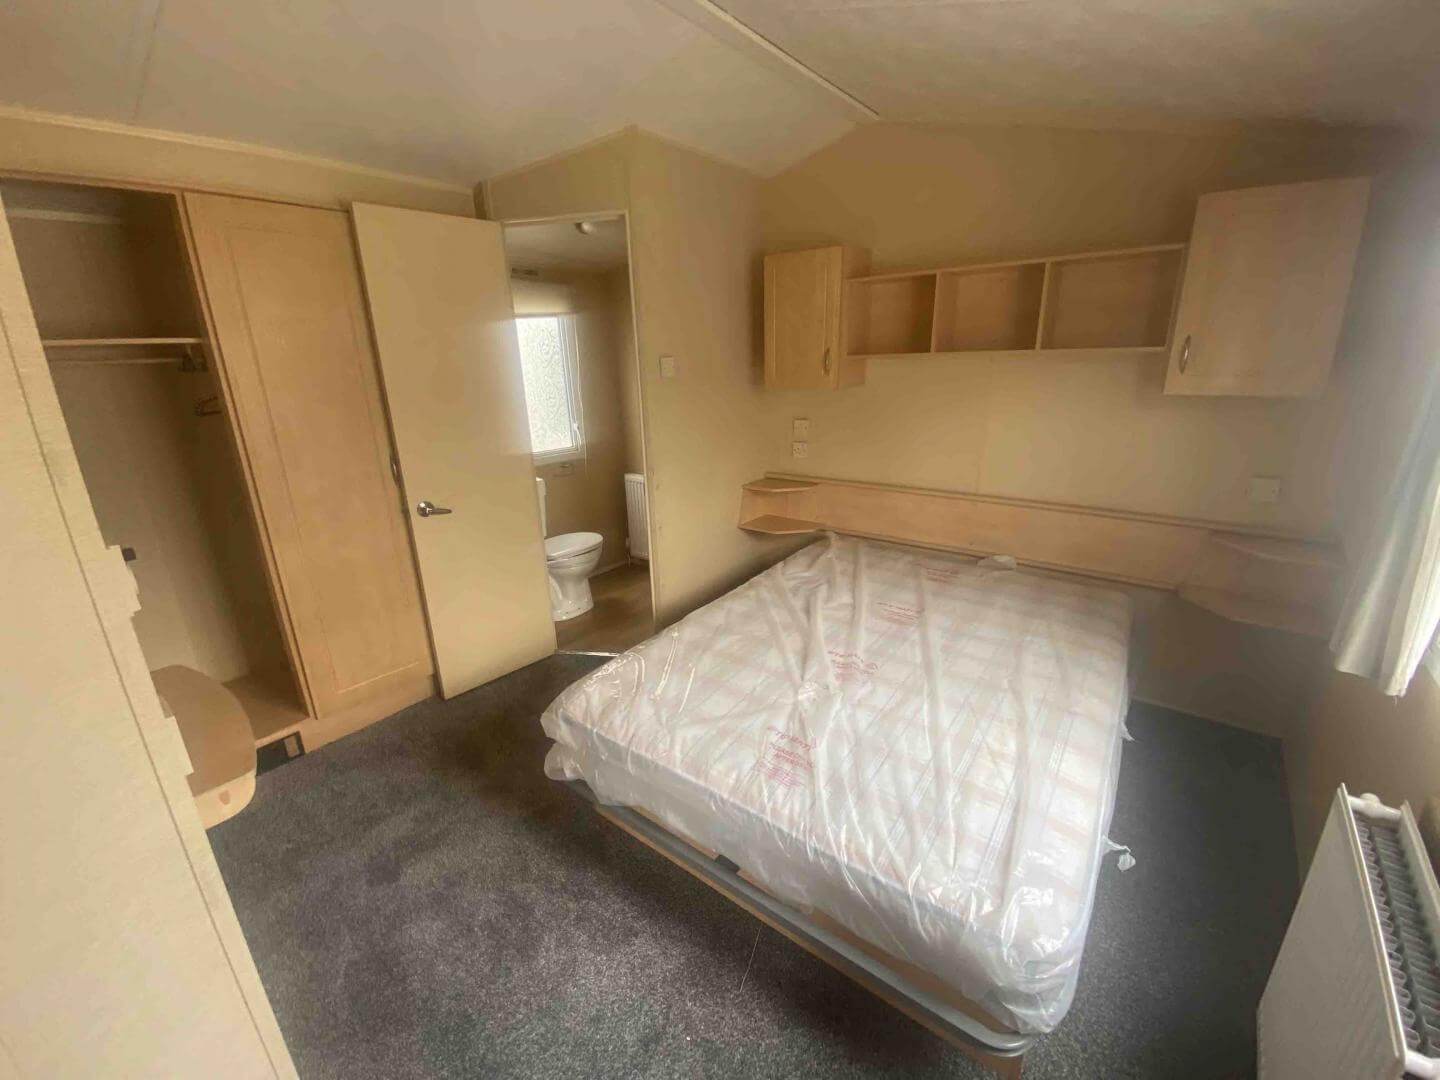 Mobil-home - Willerby 34